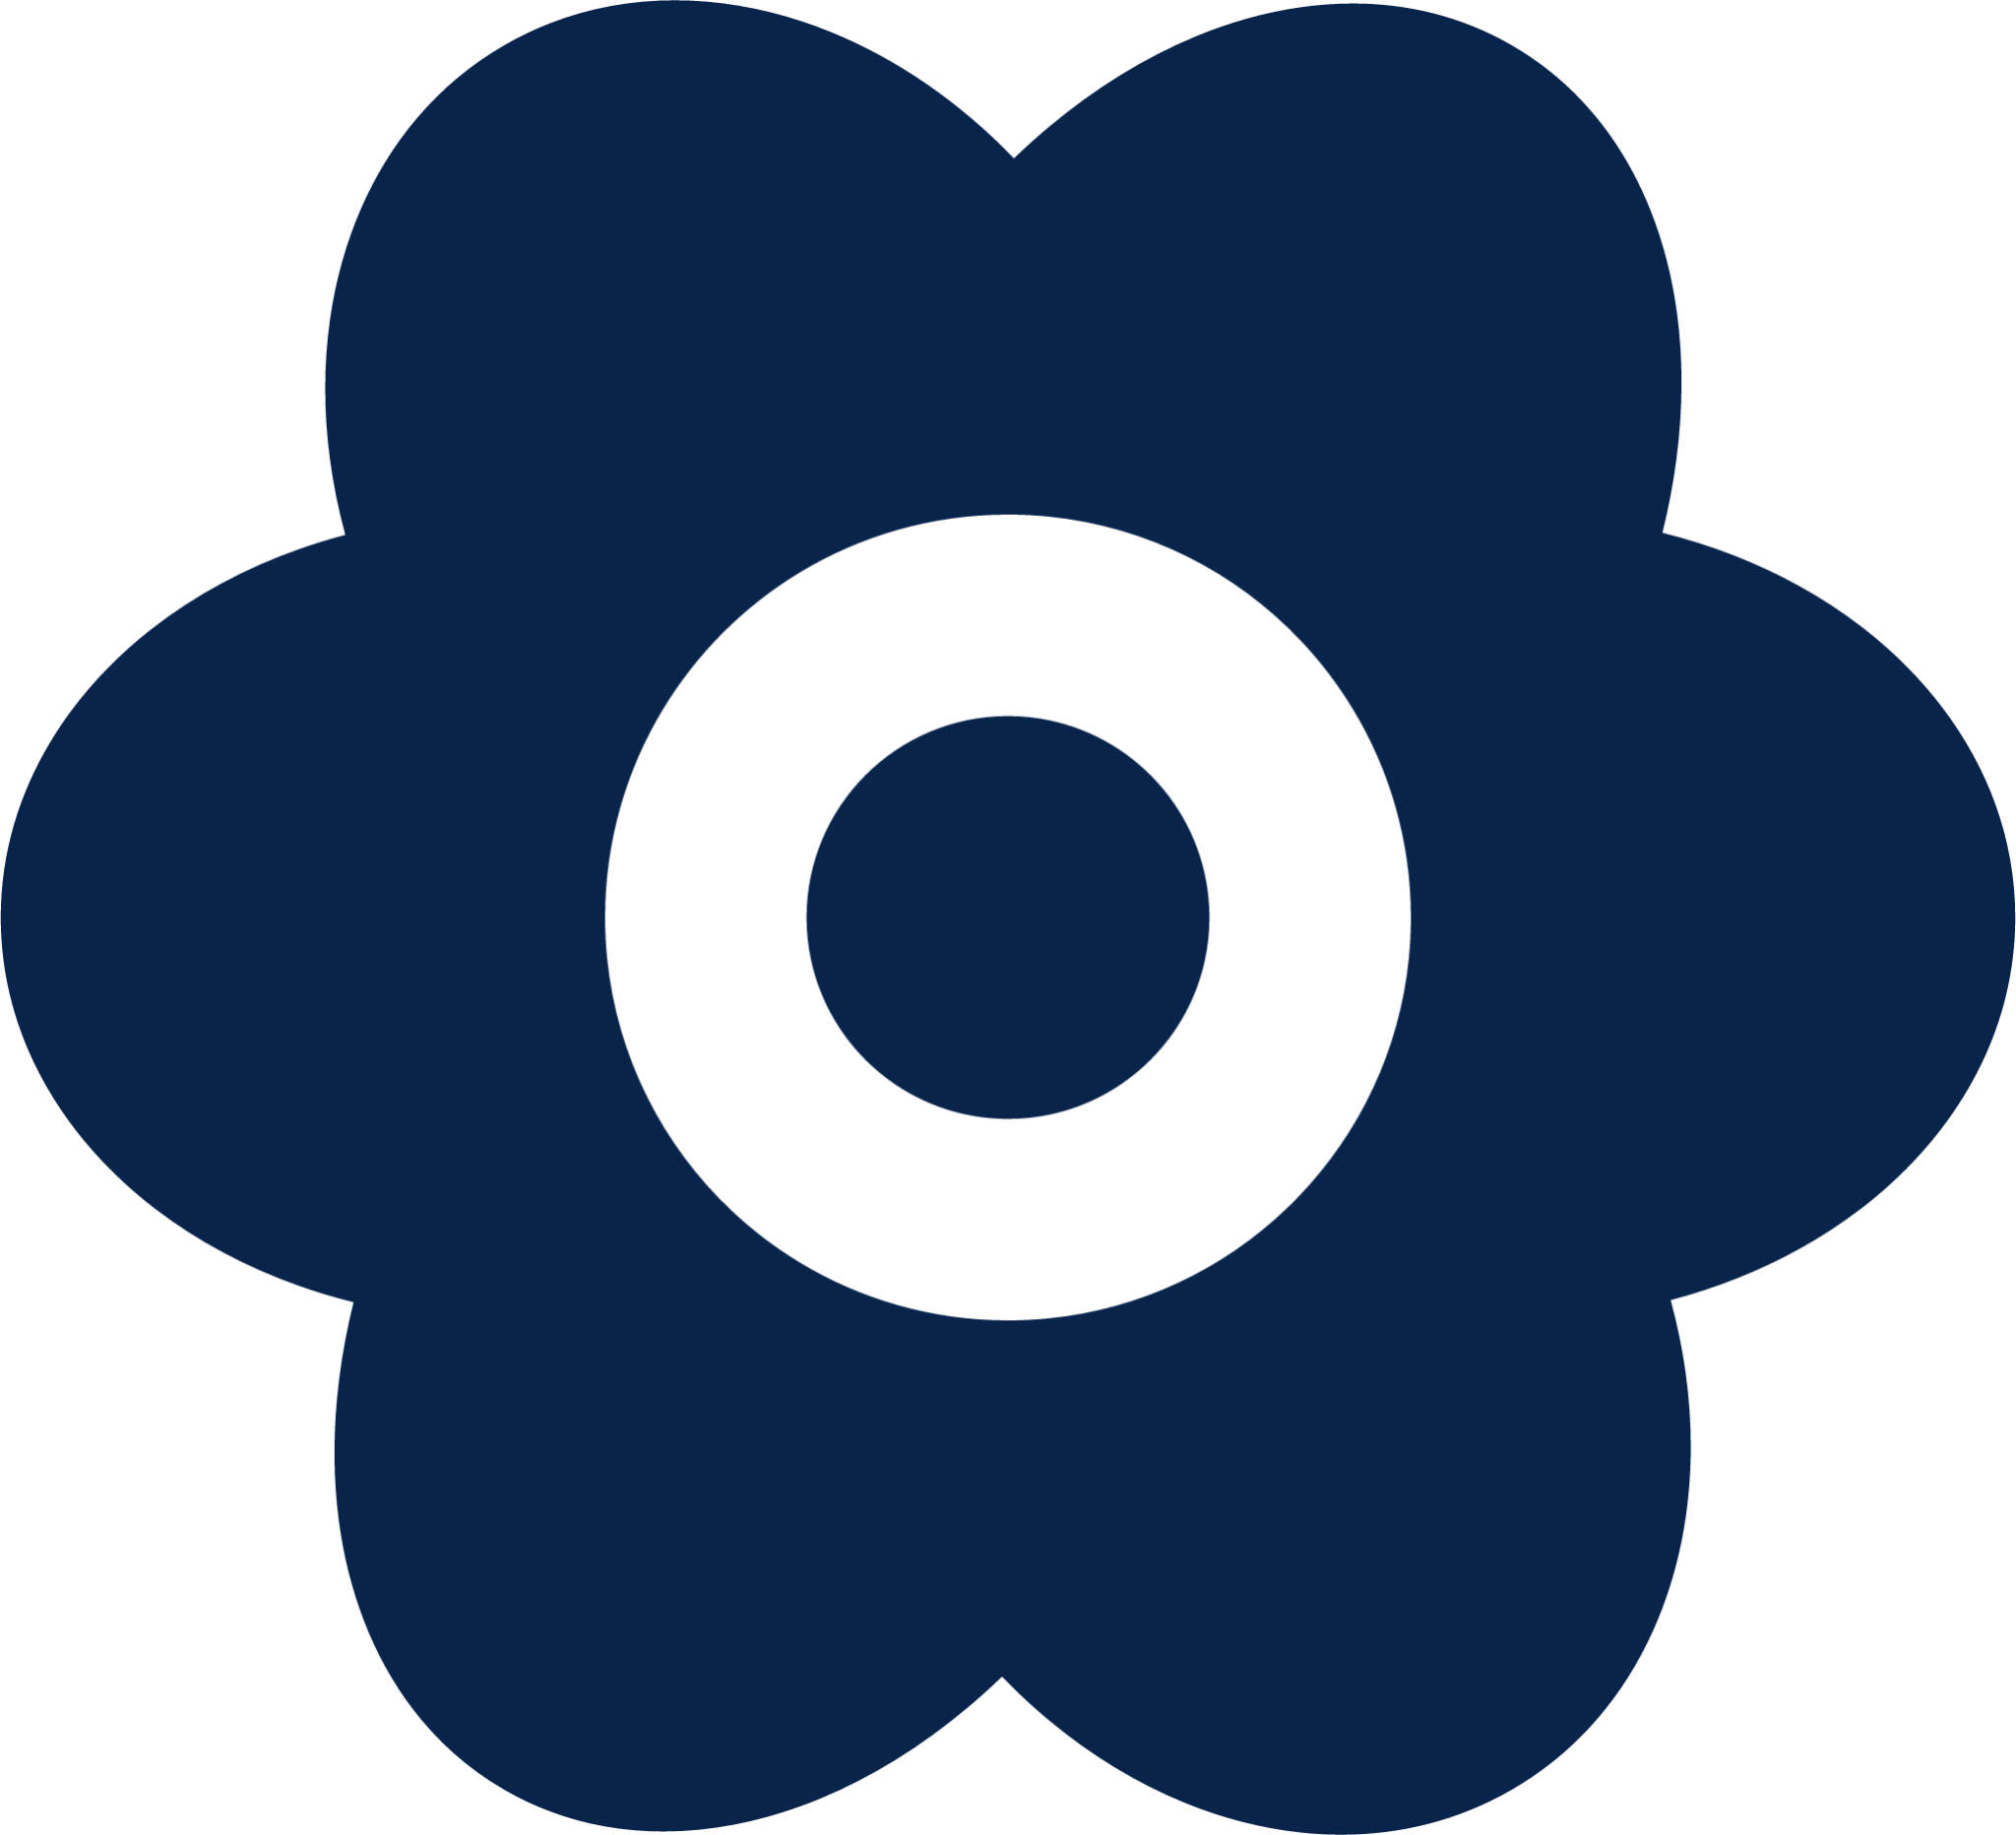 flower 2 fill system icon